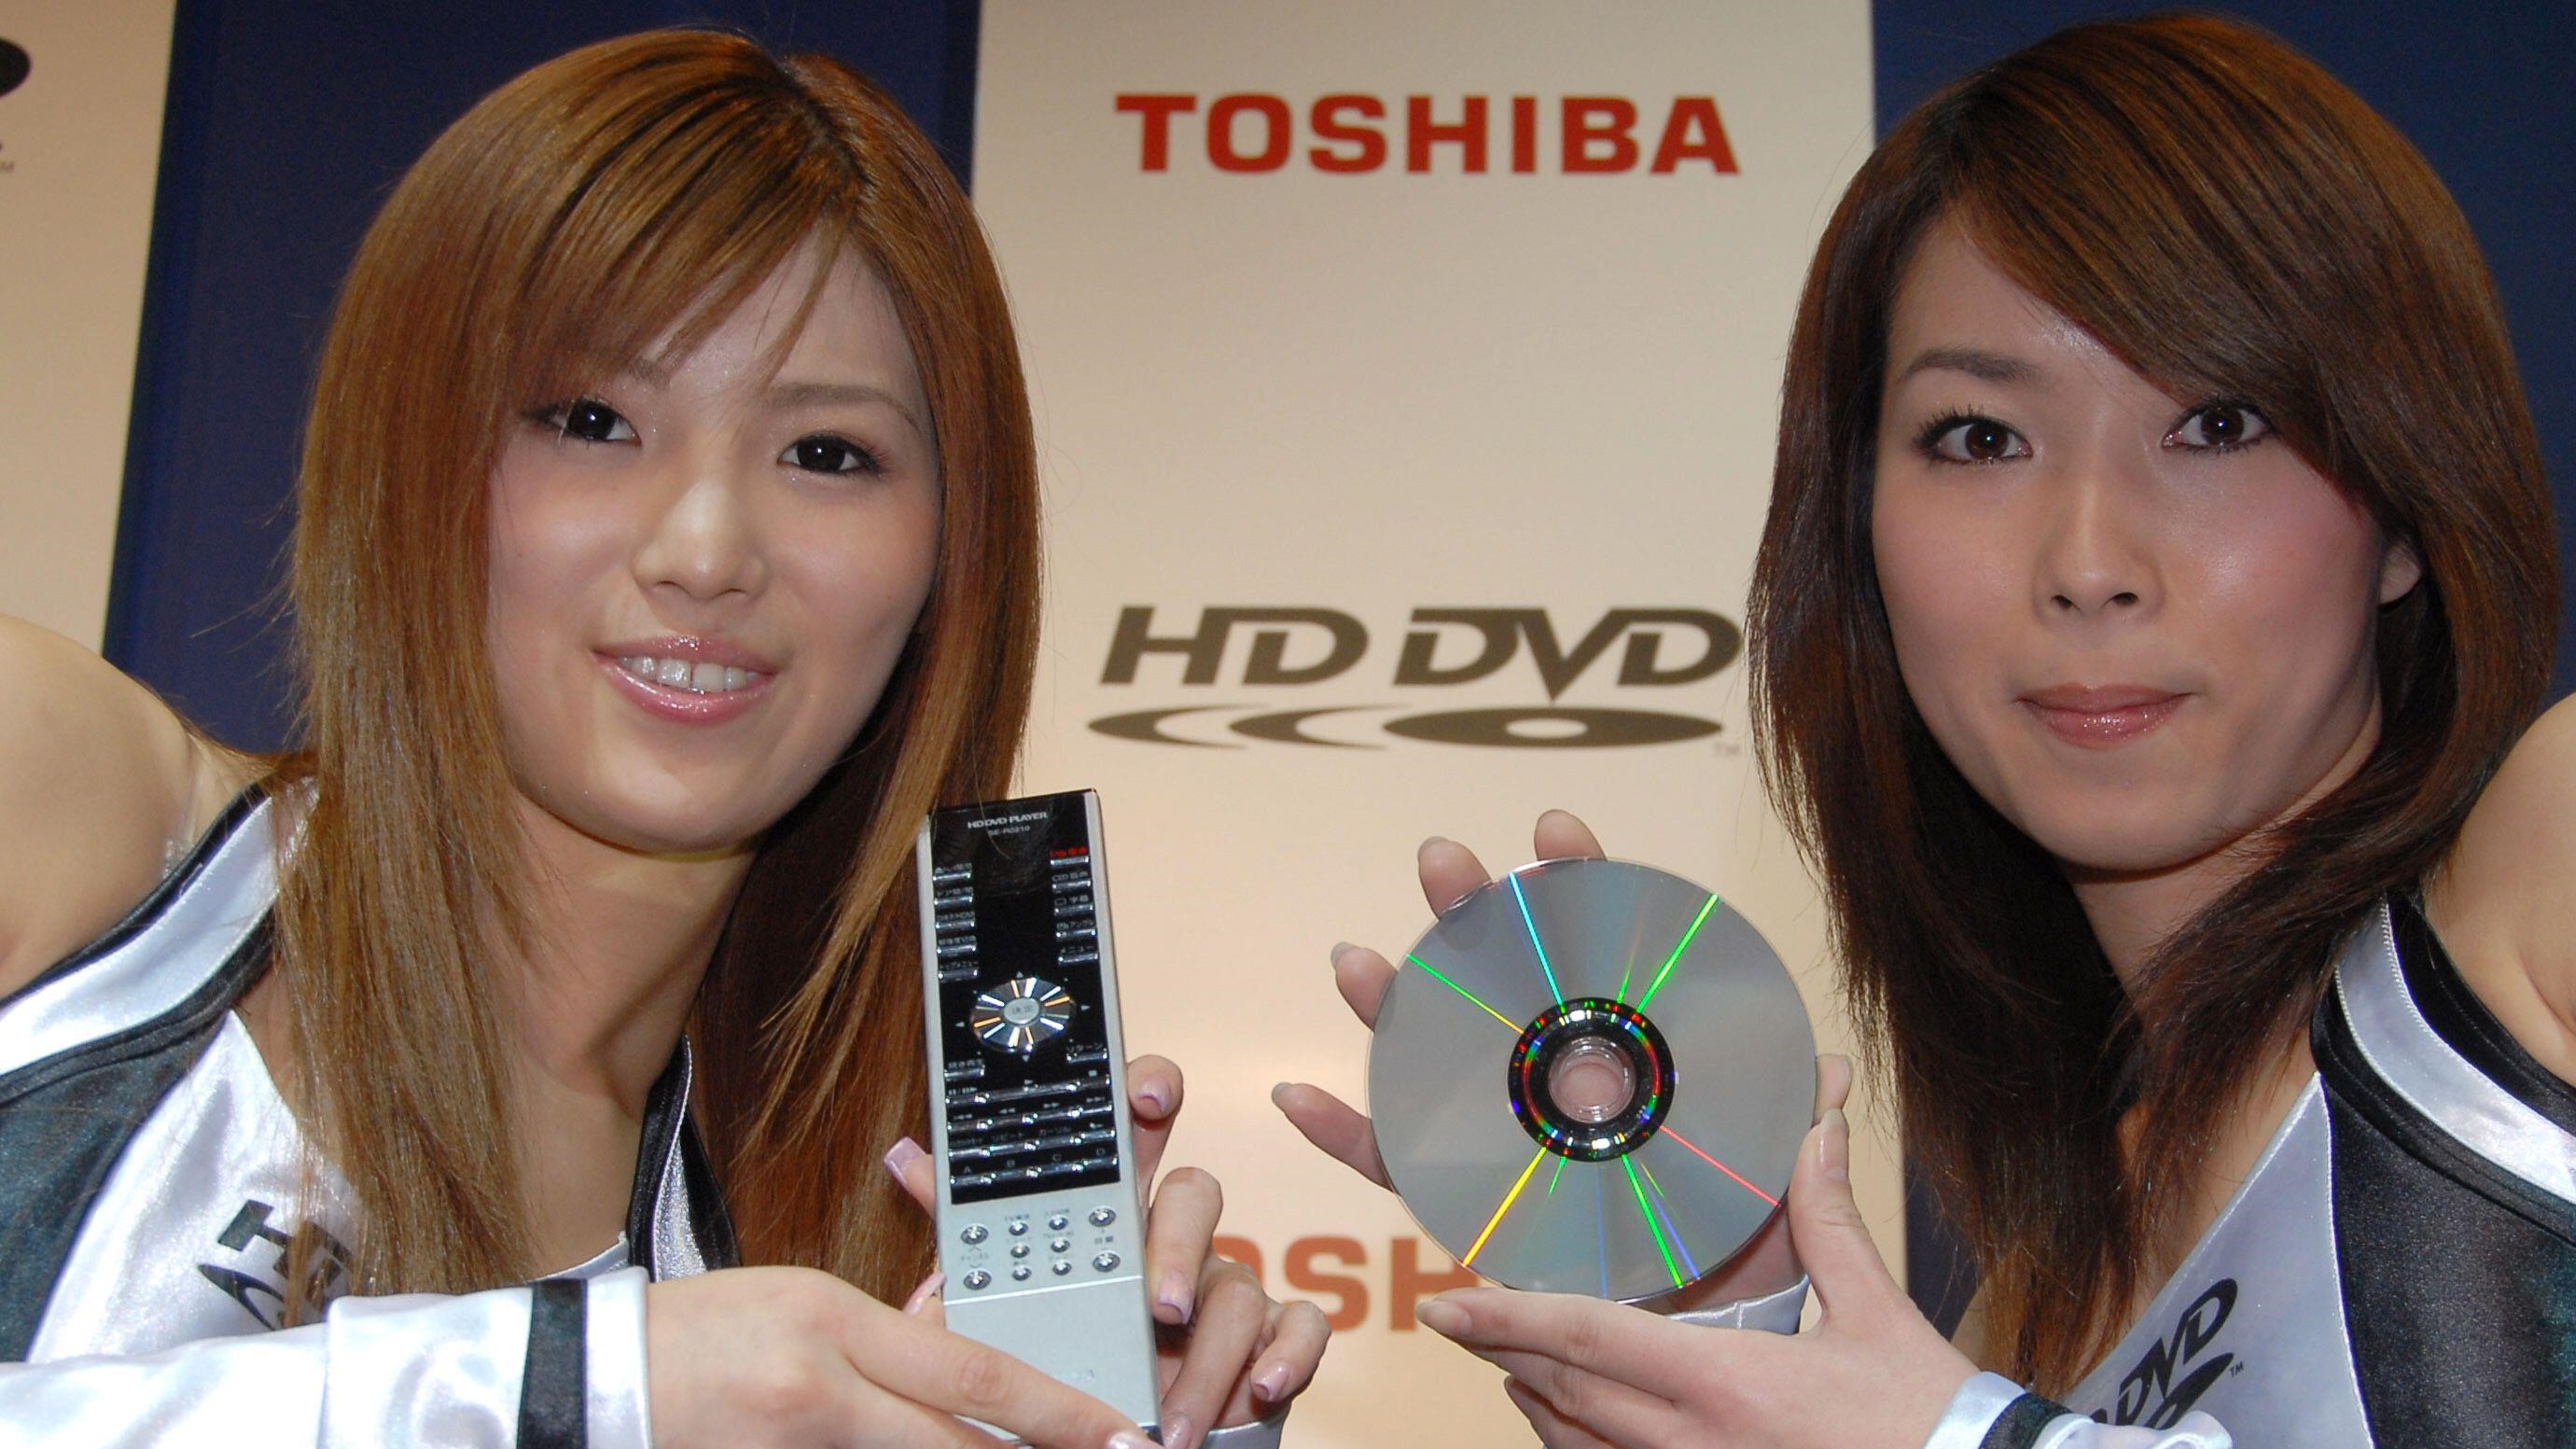 Two women hold up a DVD and remote to promote an HD DVD.